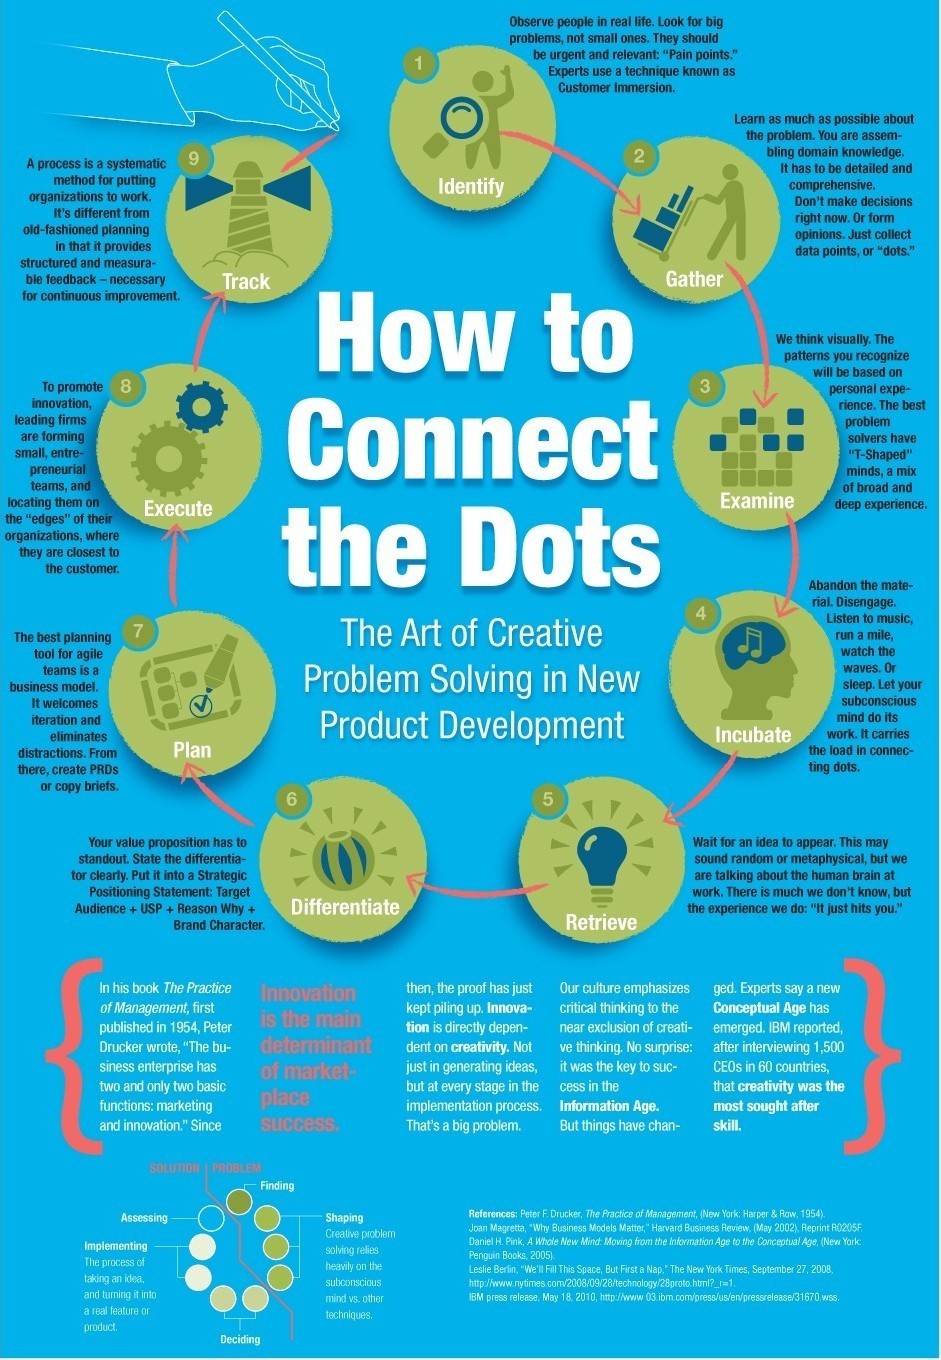 Creative Problem Solving for Product Developers (Infographic)